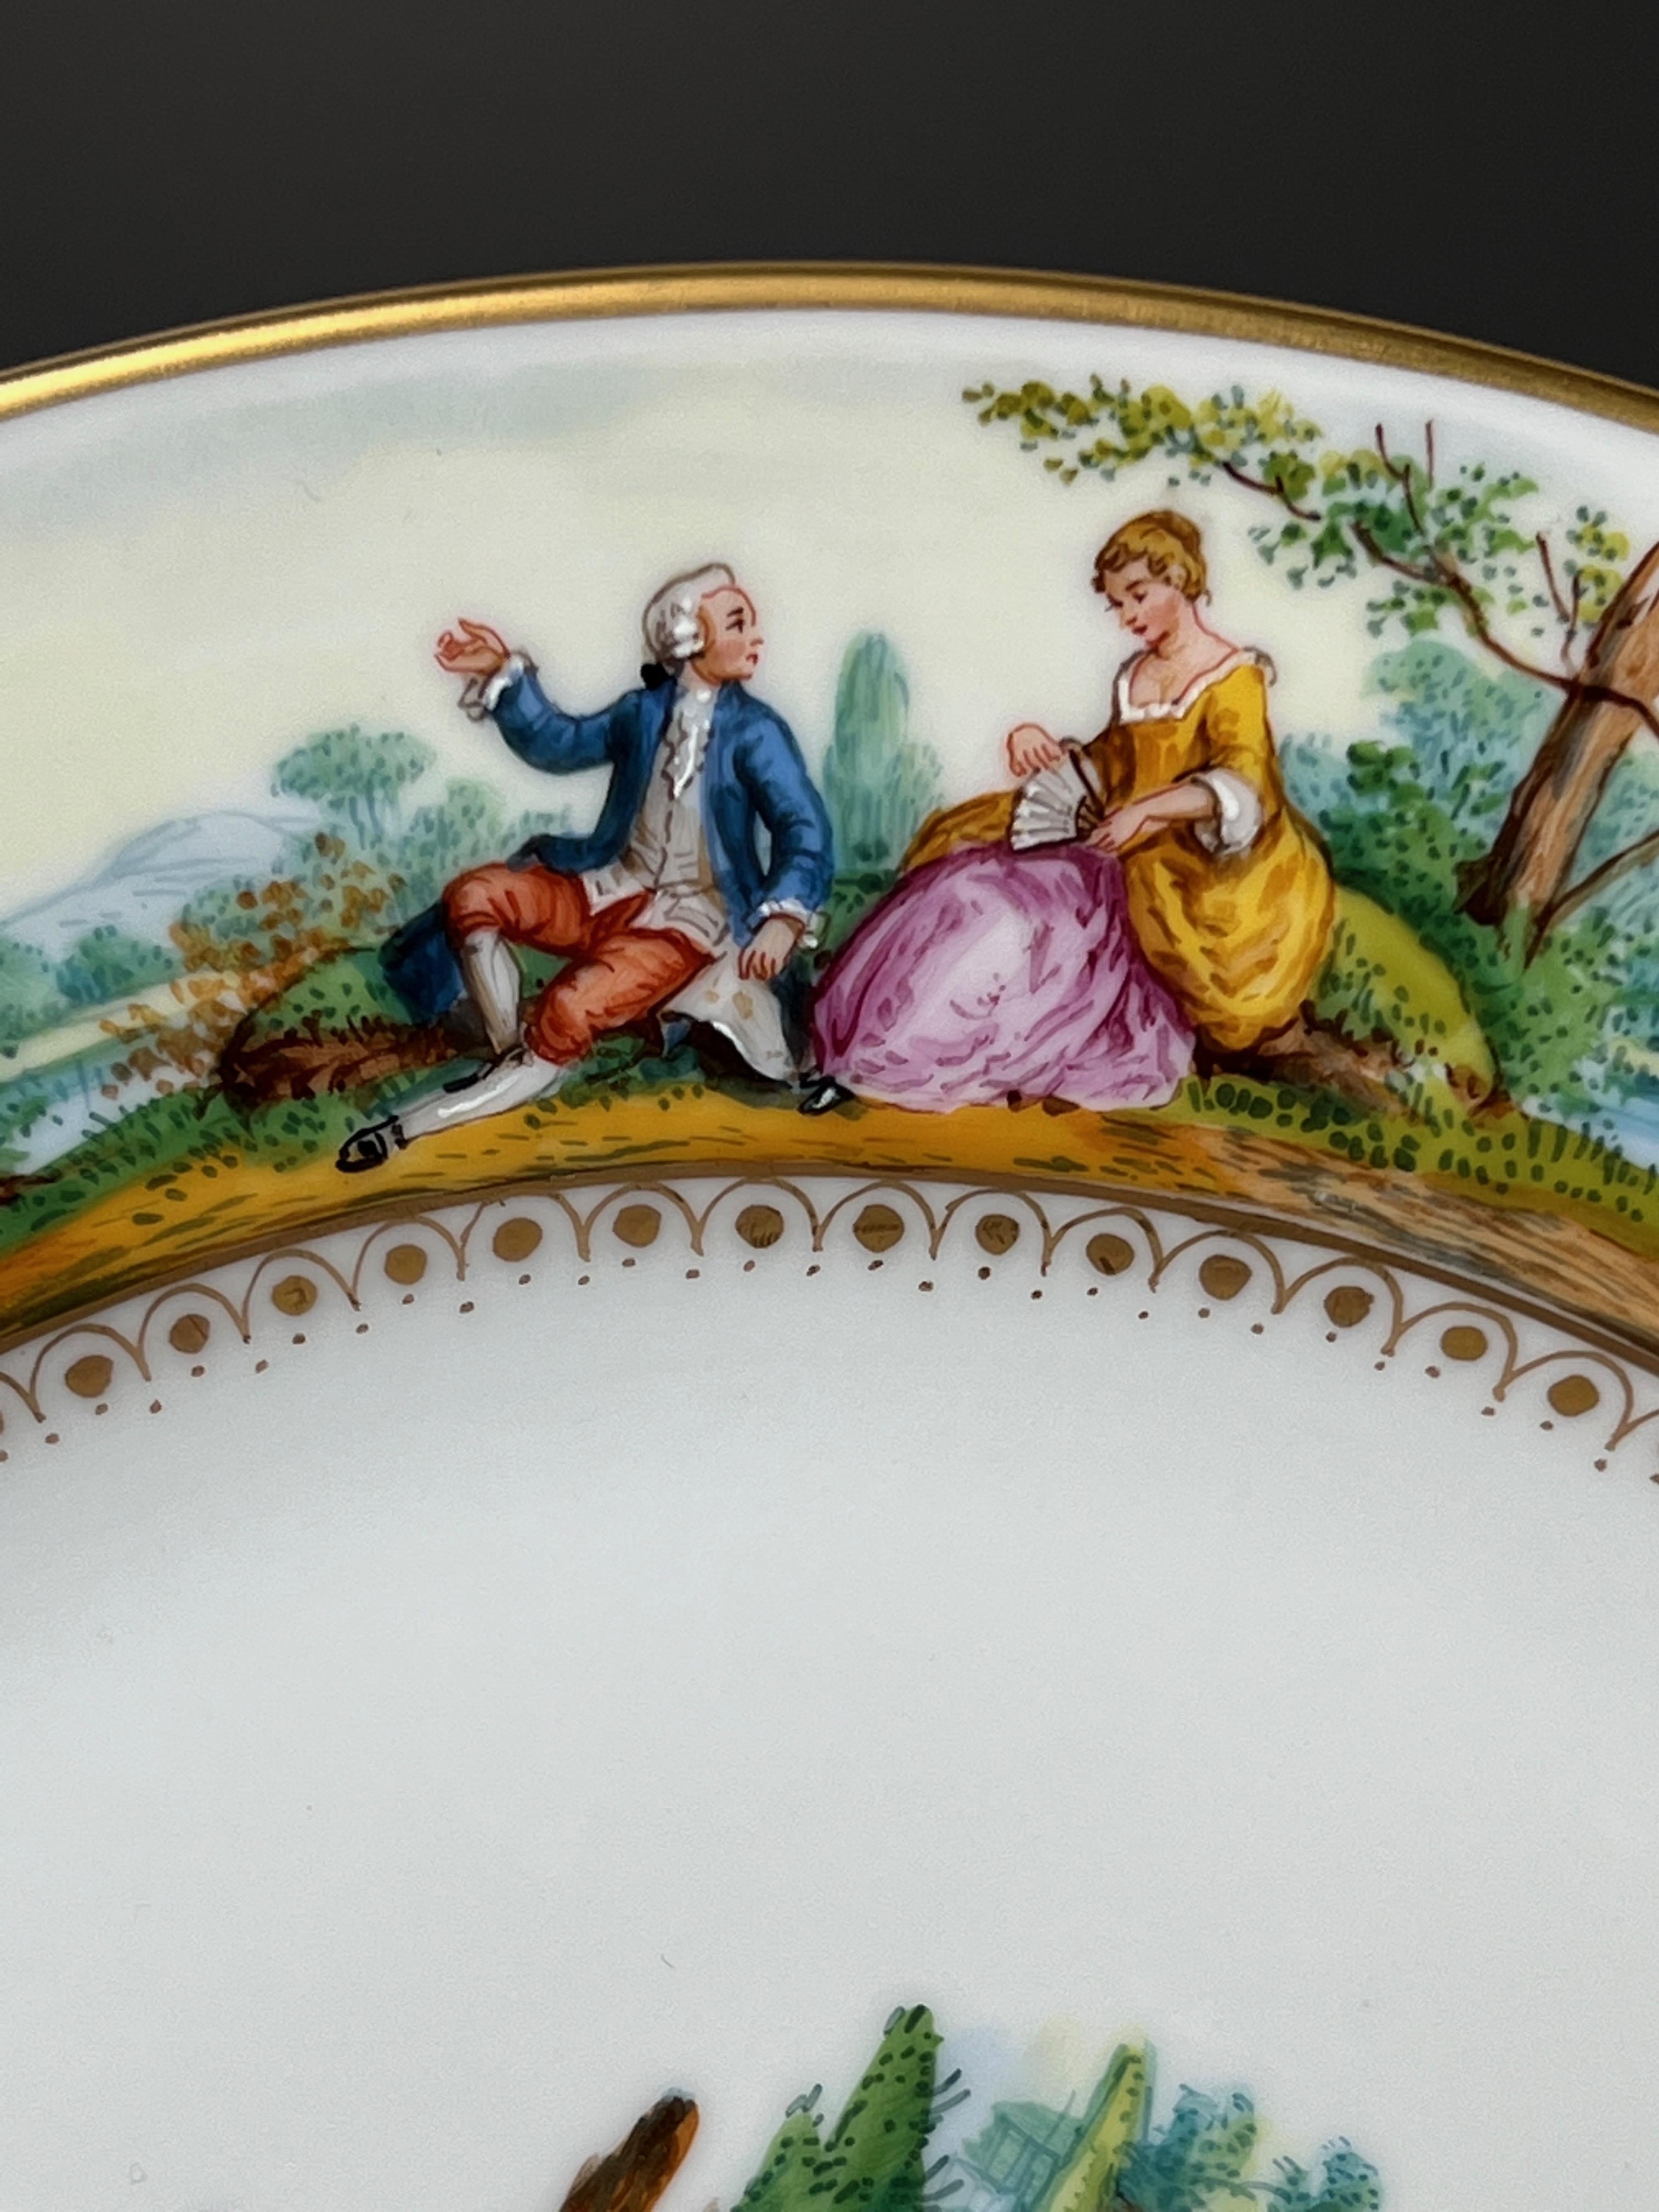 This is a set of 12 hand painted Dresden dinner plates depicing Classic Watteau scenes surrounding the borders with masterfully hand painted centers, each a unique scene. The central subjects are large and eye-catching, works of art unto themselves.